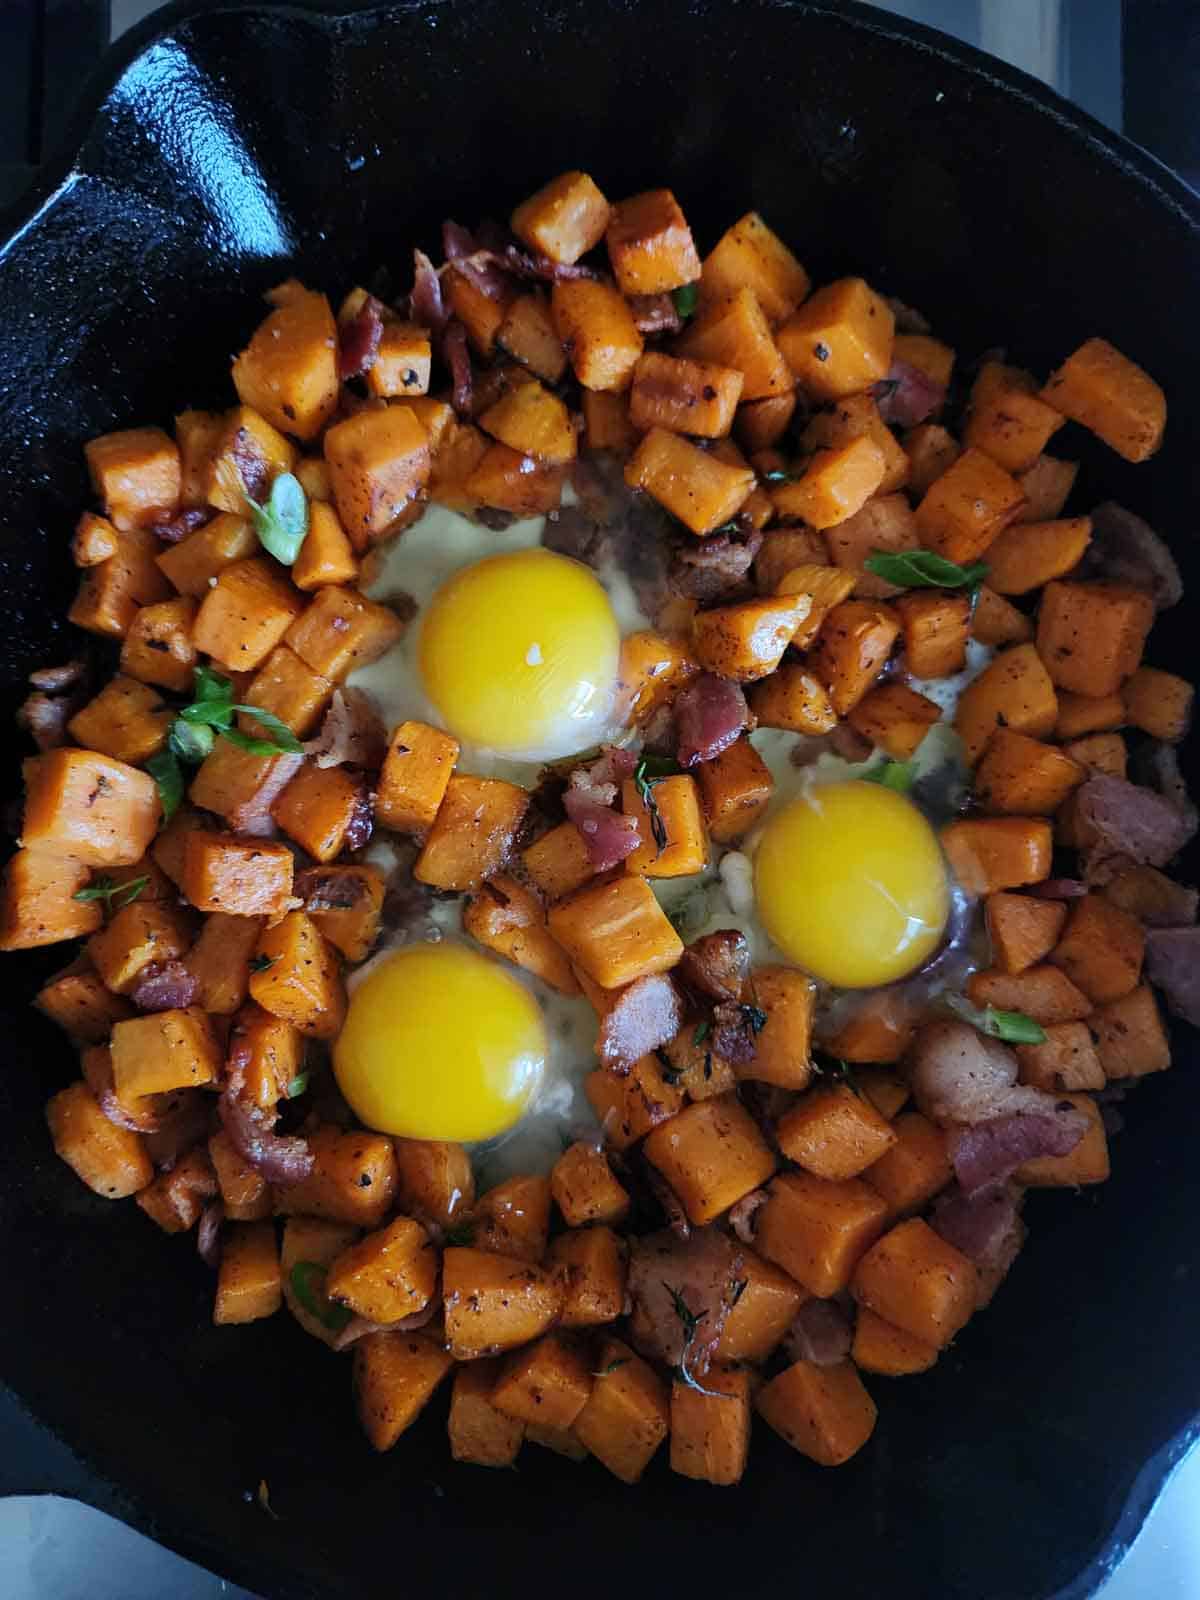 Hash in a skillet with 3 eggs in the center.